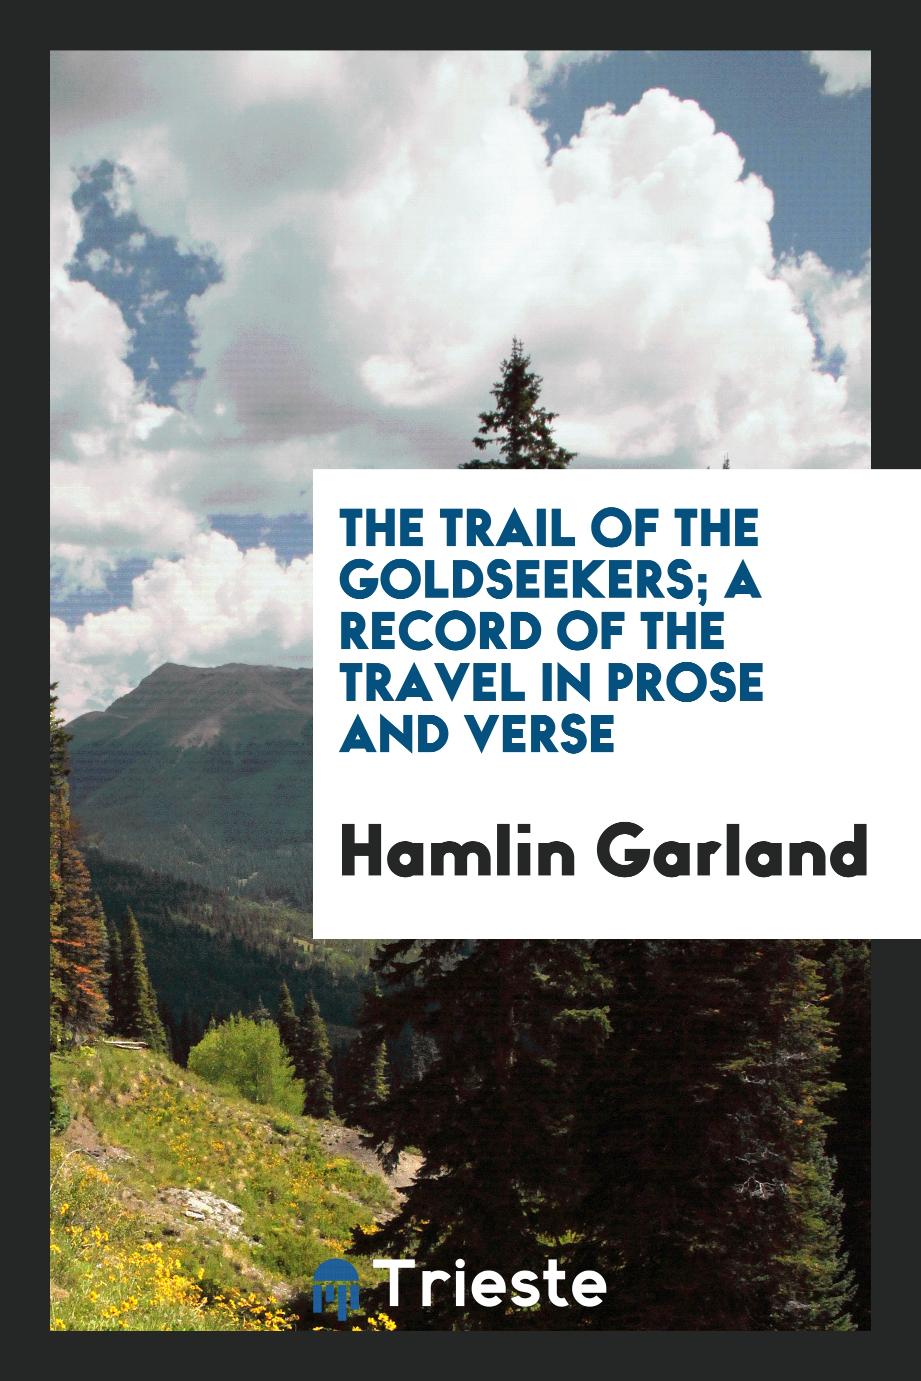 The trail of the goldseekers; a record of the travel in prose and verse